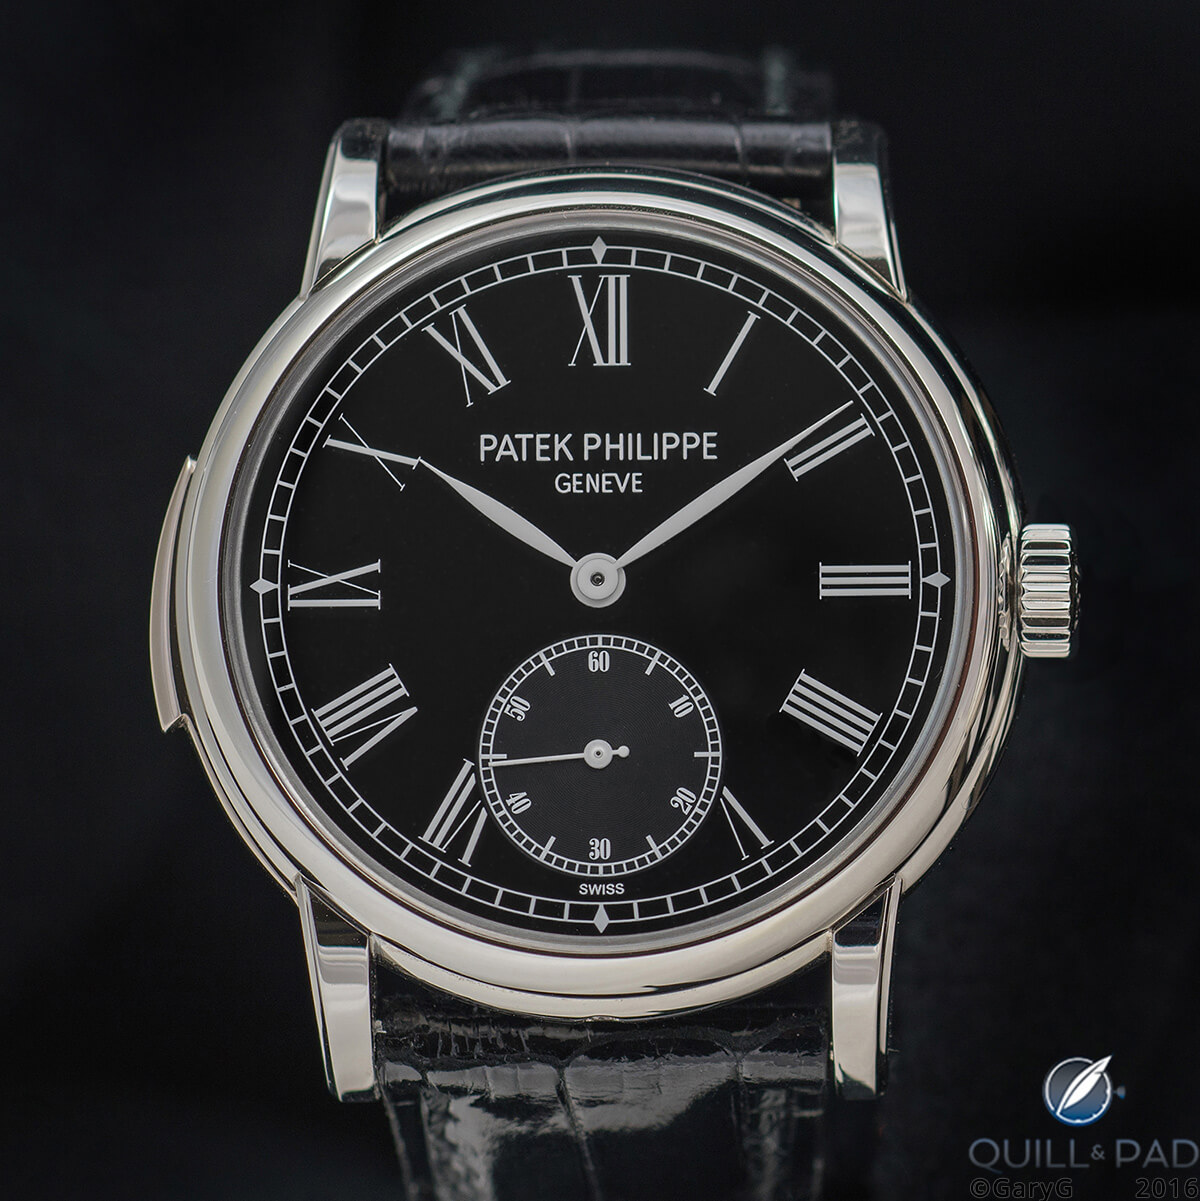 Direct dial-side view of the Patek Philippe 5078P minute repeater